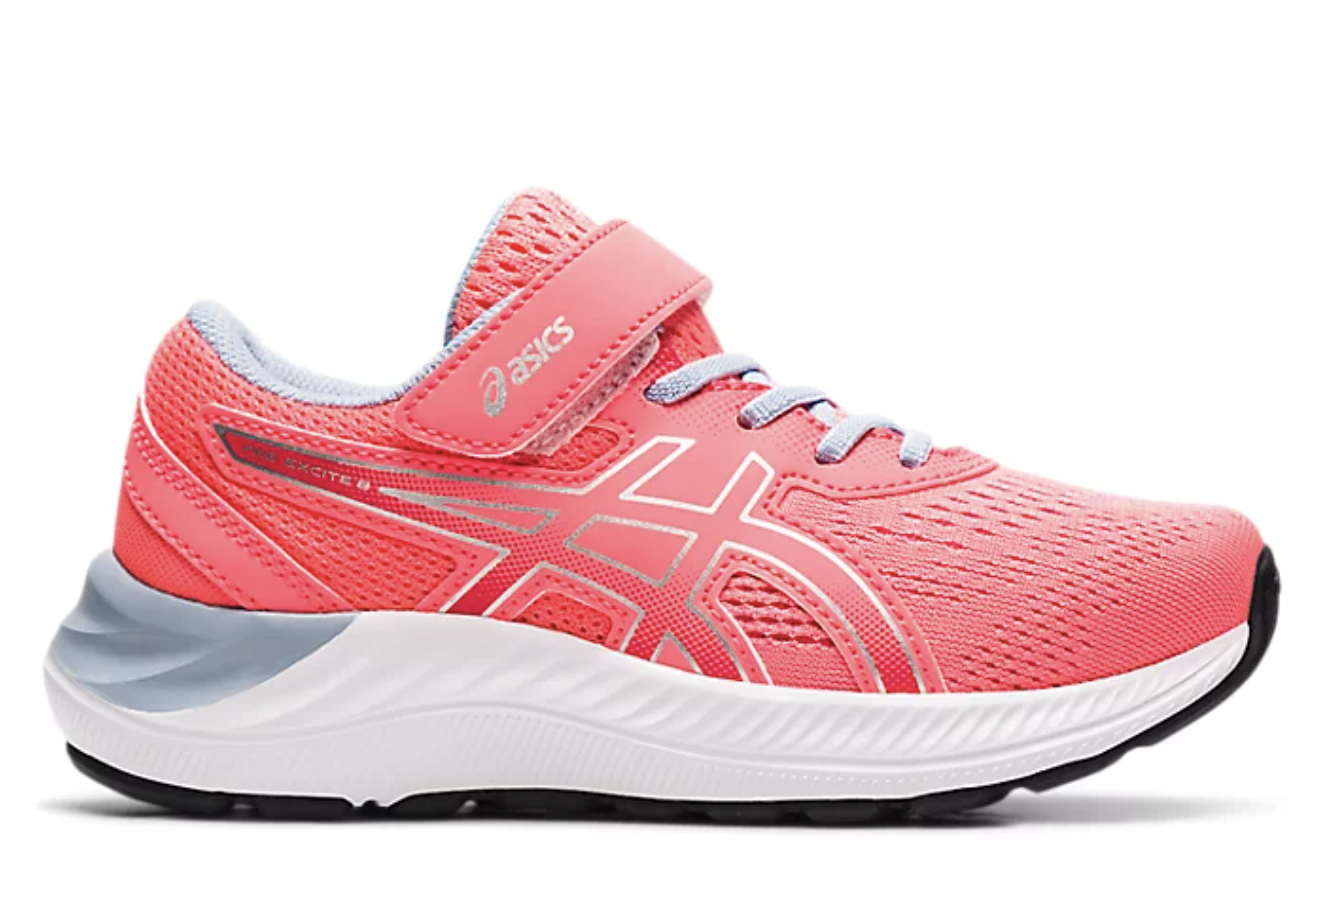 Asics Pre-Excite 8 PS | Kids | Blazing Coral